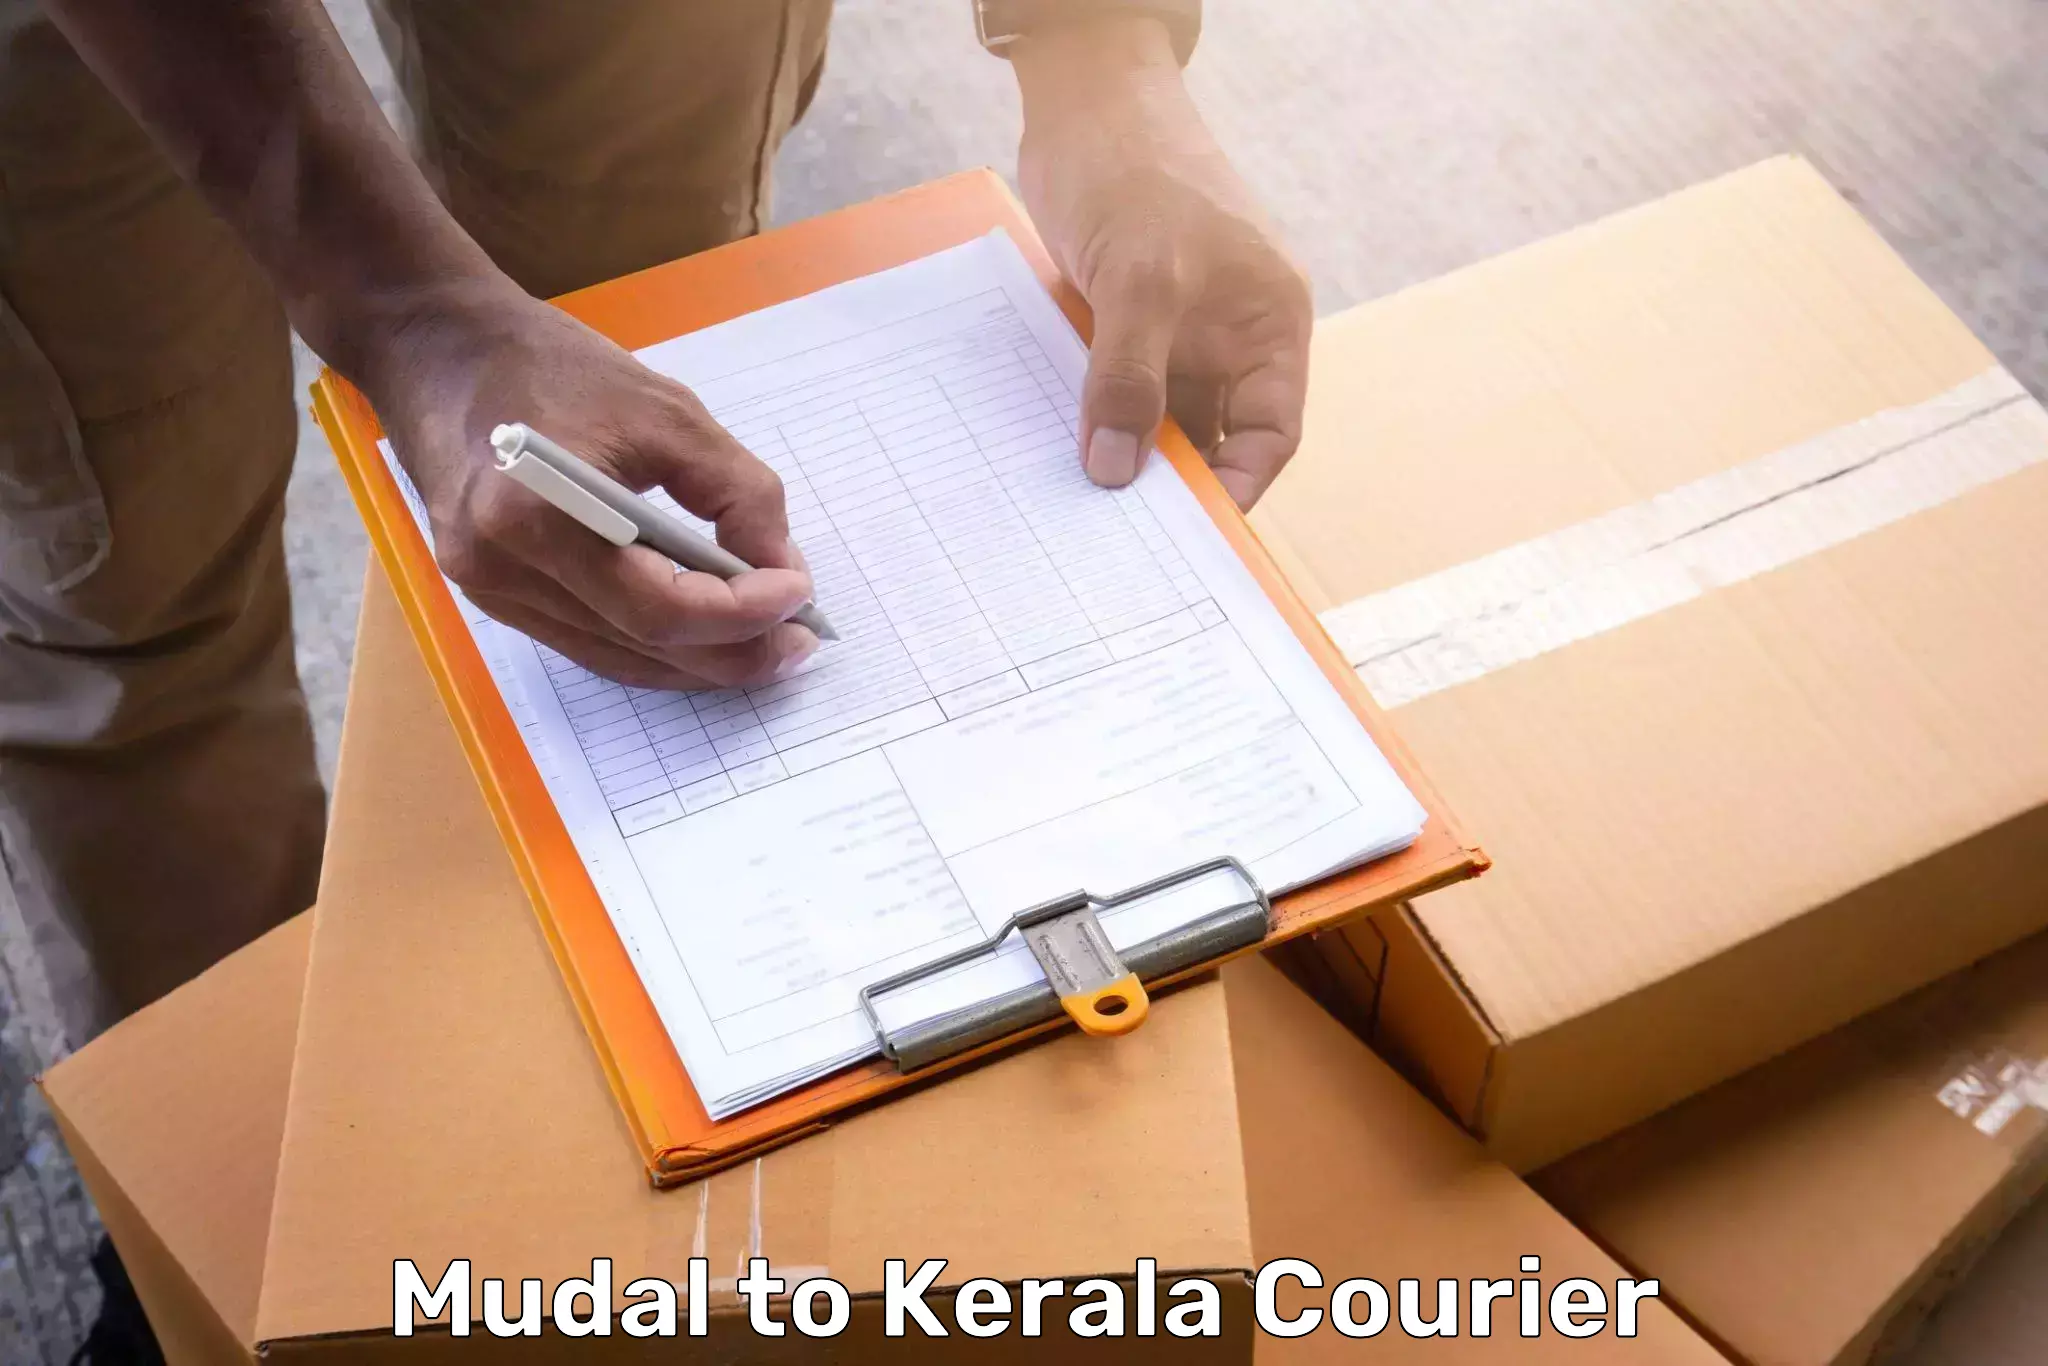 Luggage delivery system Mudal to Kerala